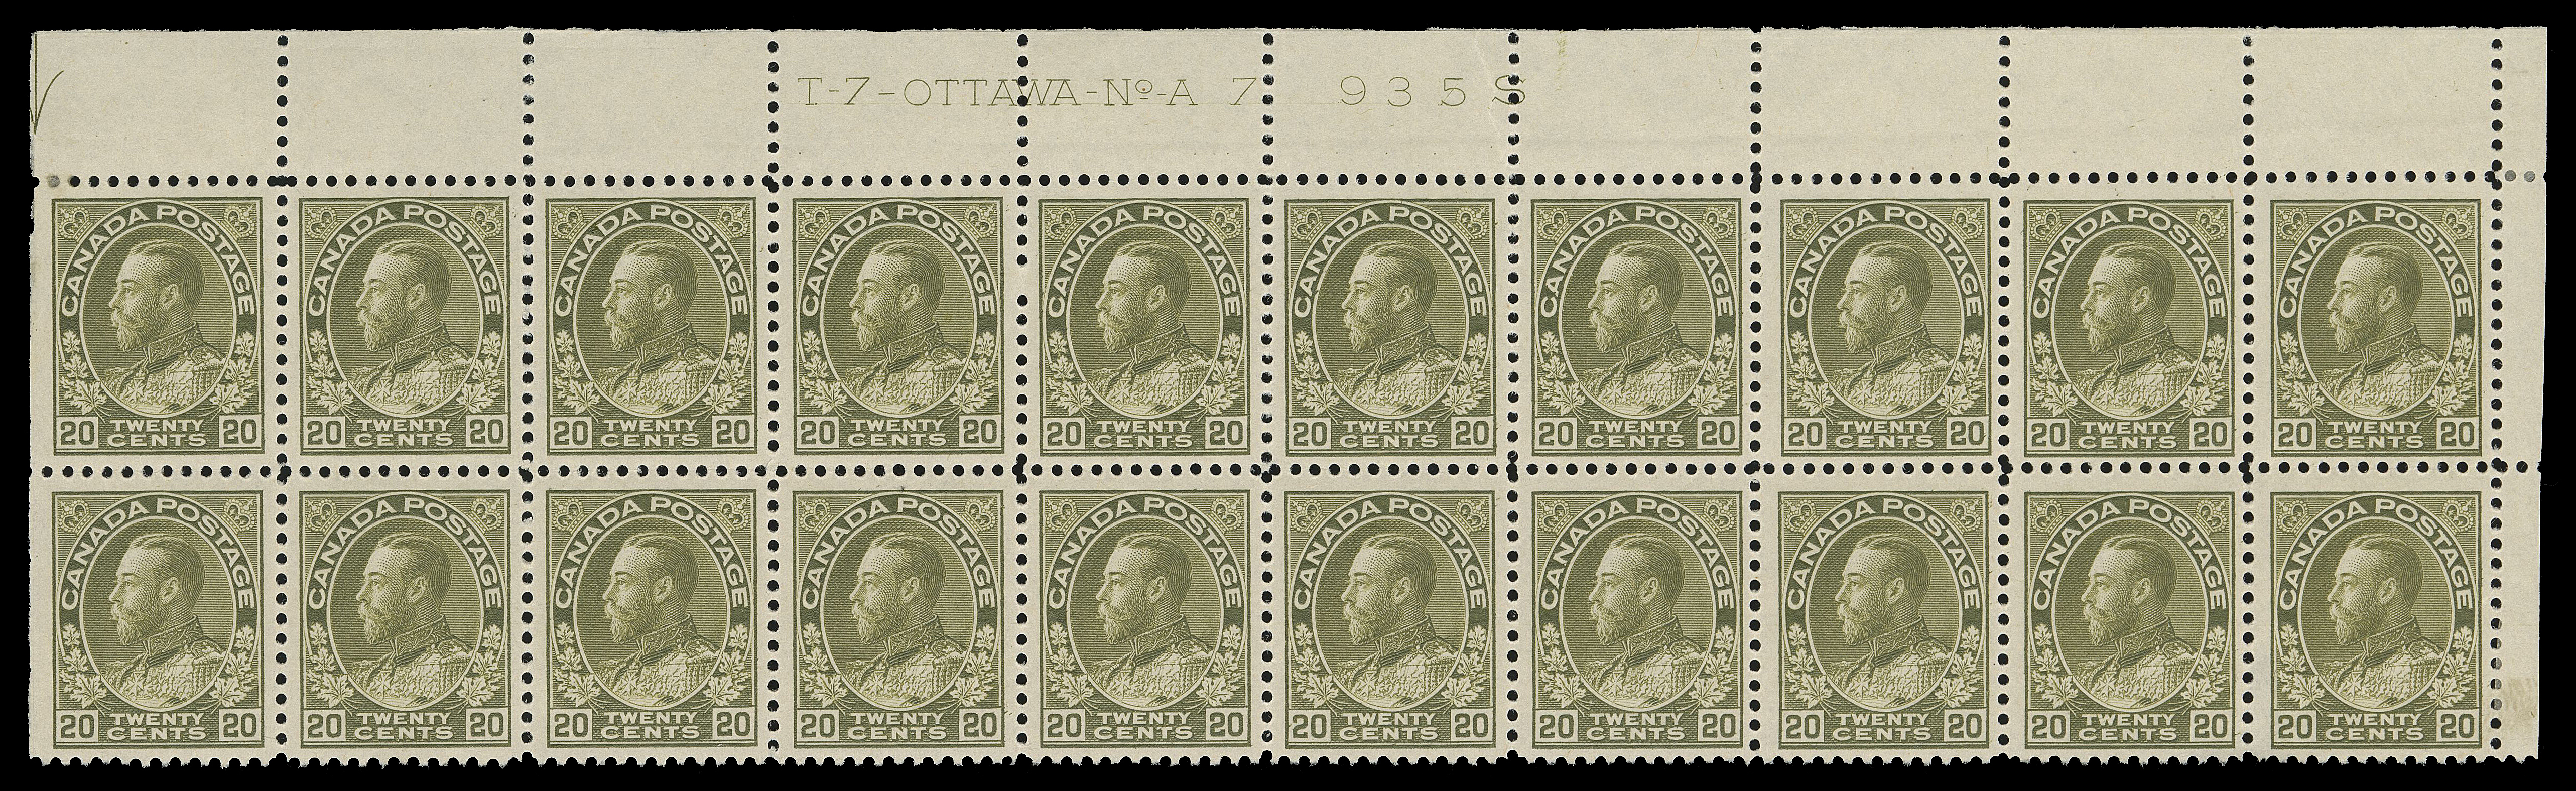 ADMIRAL STAMPS  119c,An impressive upper right Plate 7 block of twenty in a shade closely resembling (if not) sage green, hinged on end columns, thinning on bottom right pair, otherwise very well centered for such a large plate multiple, fifteen stamps with full immaculate original gum and NH. Quite possibly the largest surviving Plate 7 block, VF (Unitrade cat. $10,000)

Provenance: C.M. Jephcott, Maresch Sale 241, June 1990; Lot 902